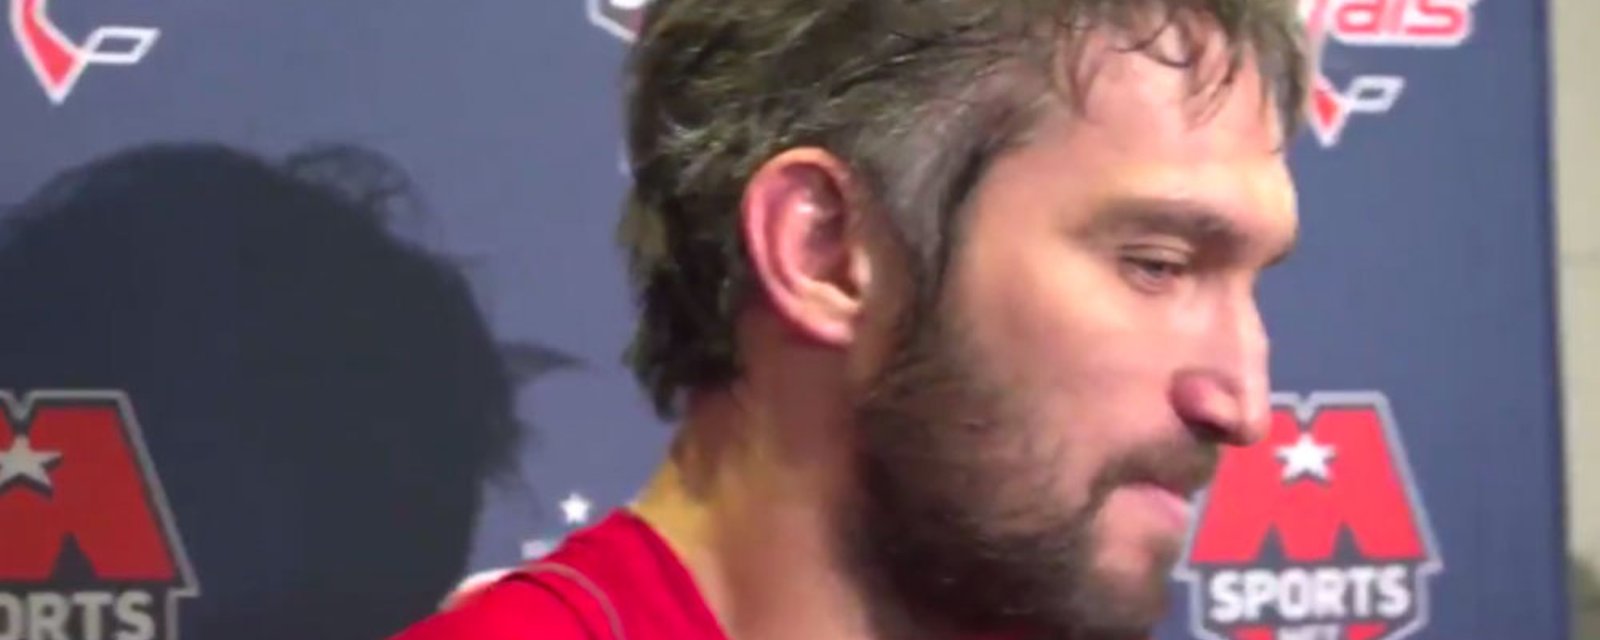 Breaking: Ovechkin refuses to go to All-Star game and faces suspension 